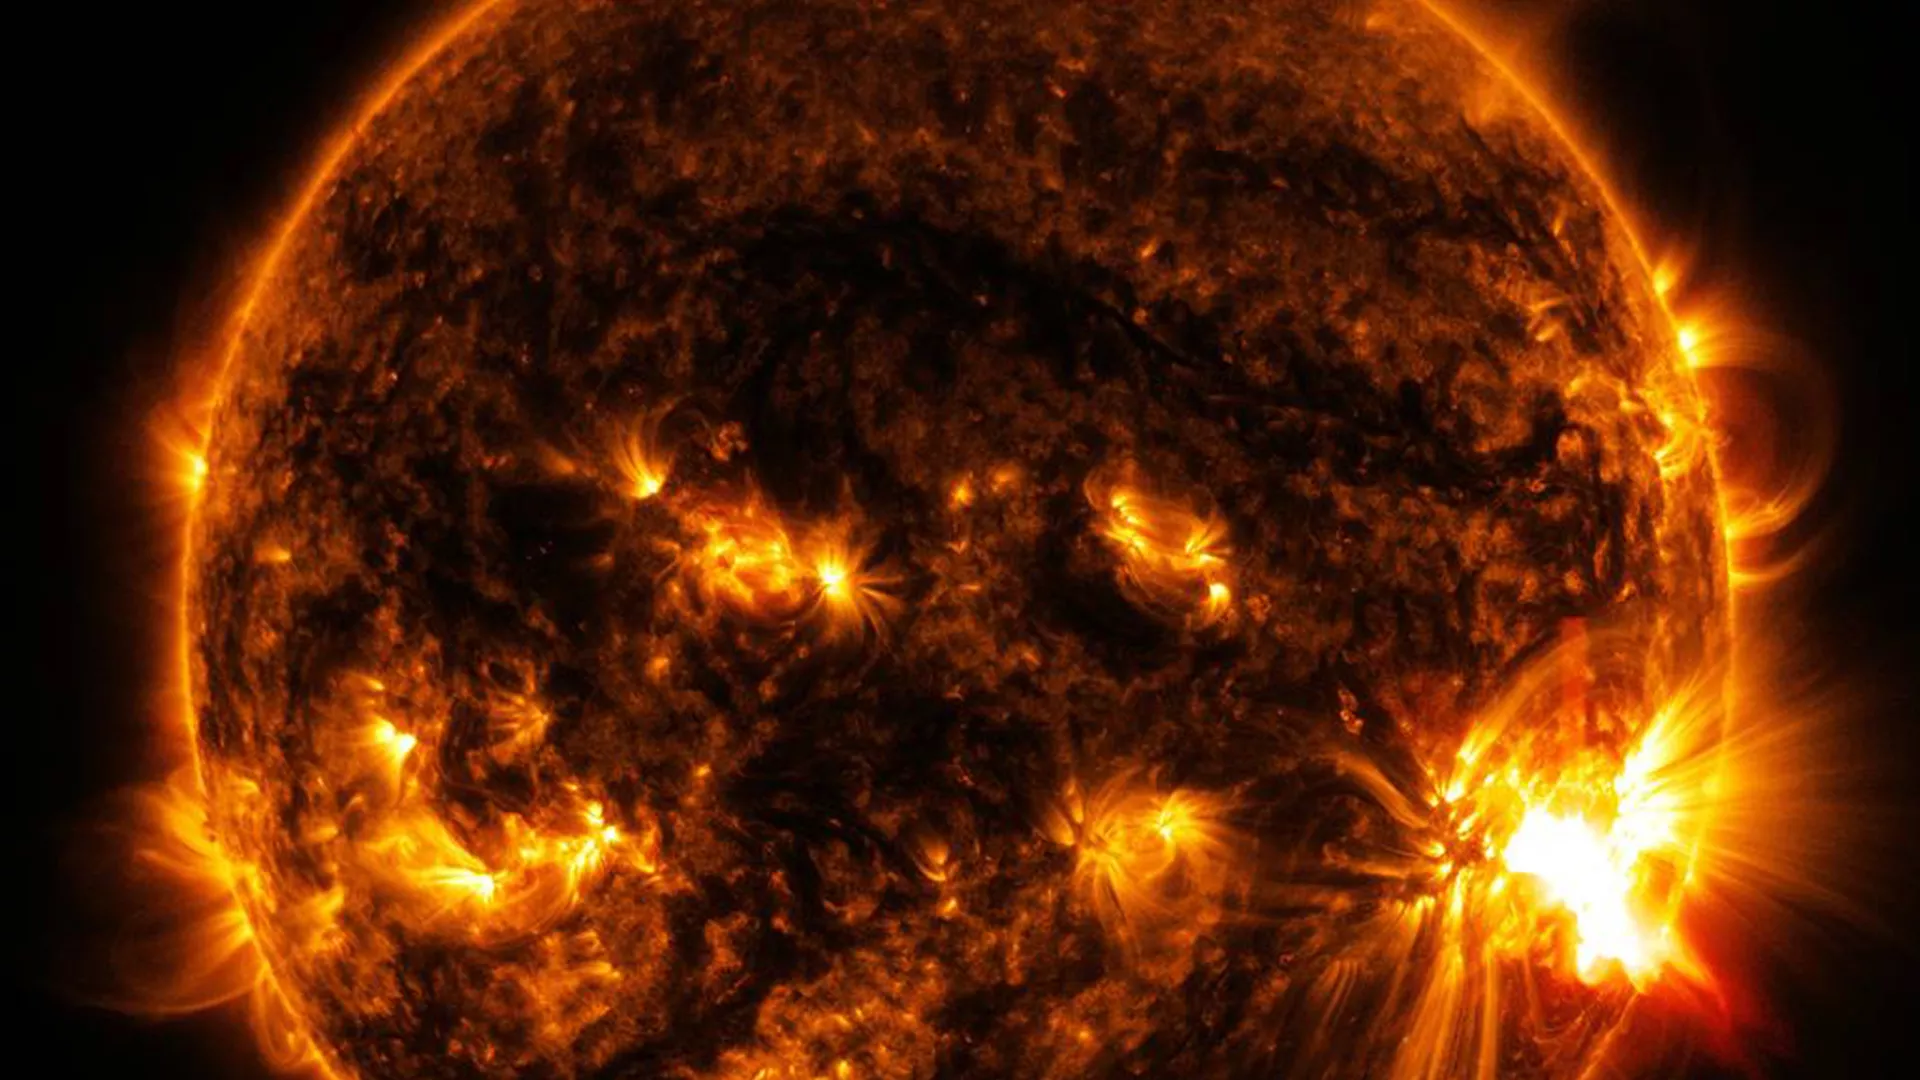 Image of a solar flare on the sun